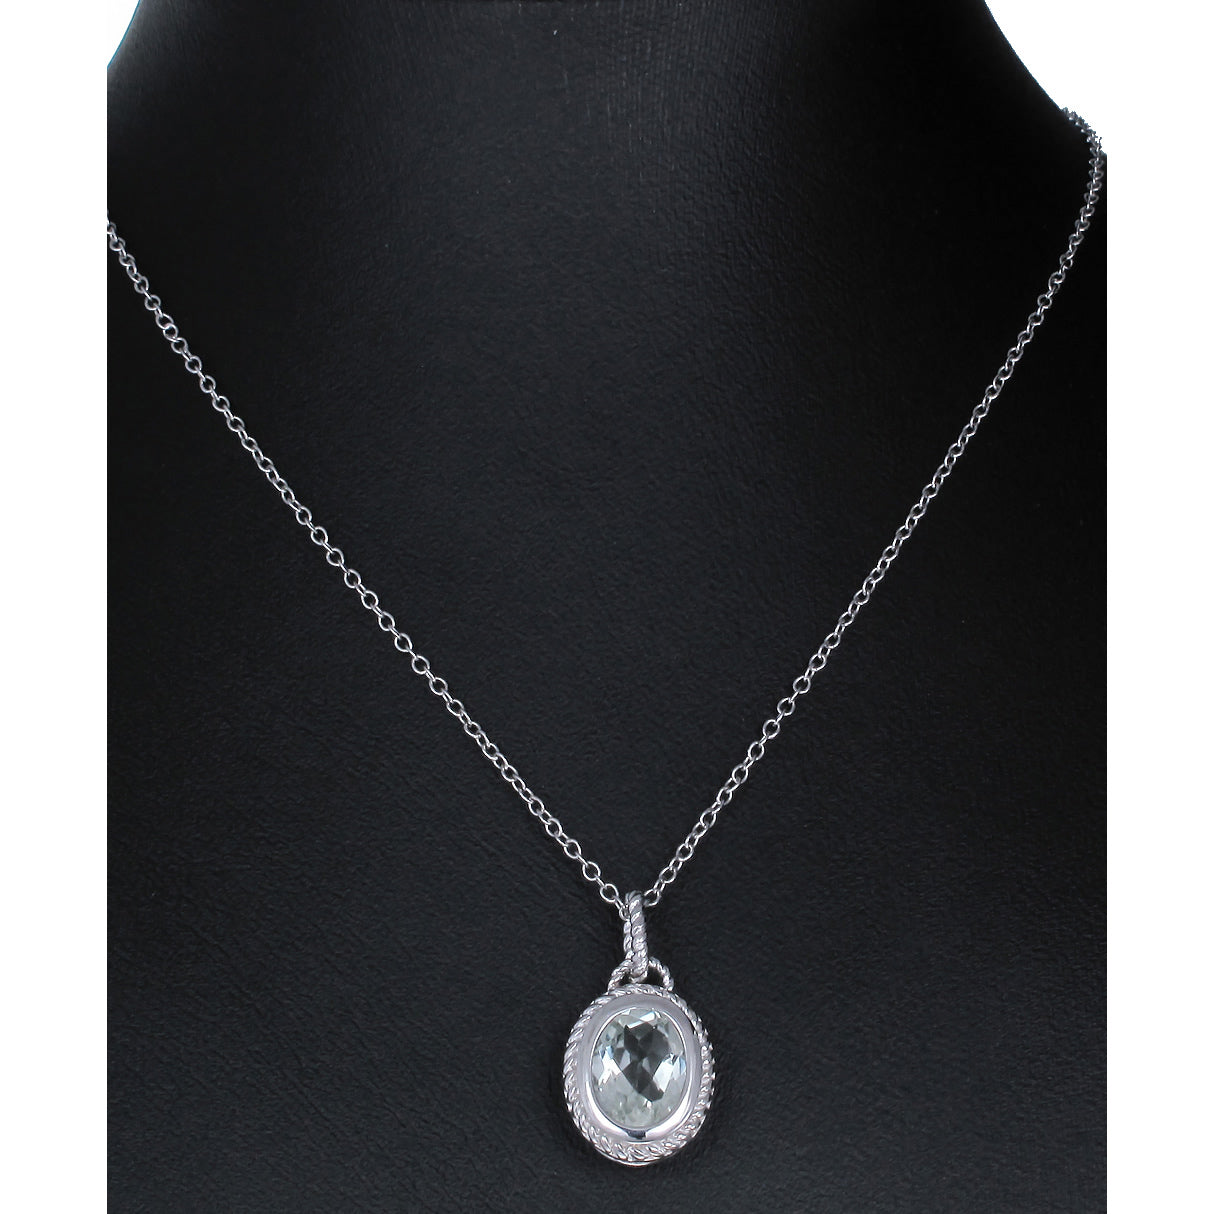 1.70 cttw Pendant Necklace, Green Amethyst Oval Shape Pendant Necklace for Women in .925 Sterling Silver with Rhodium, 18 Inch Chain, Channel Setting